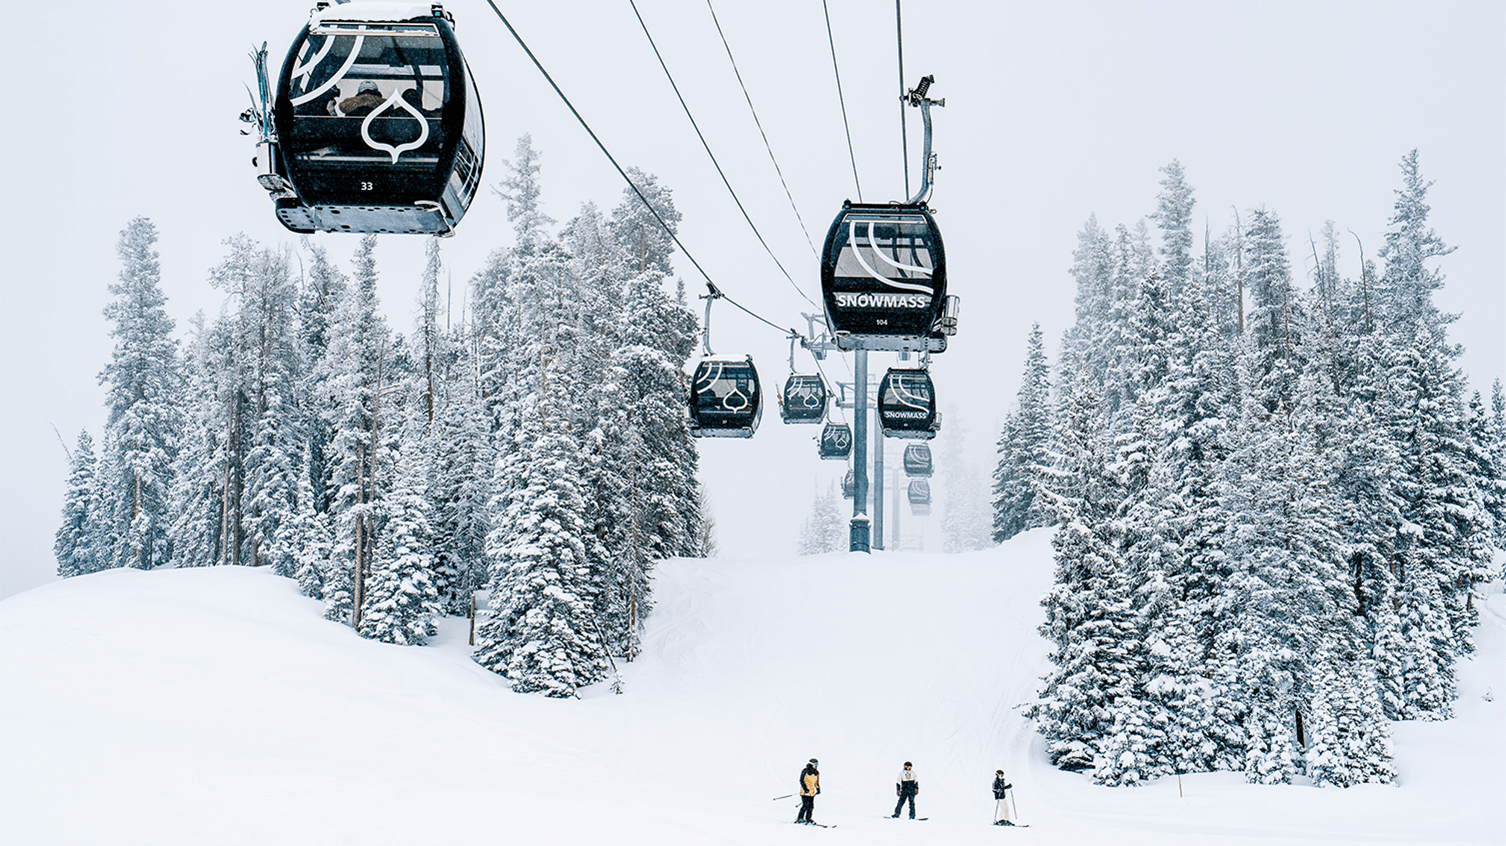 Snowmass Gondola on a cloudy day, skiers below the cars and snow coats the tree